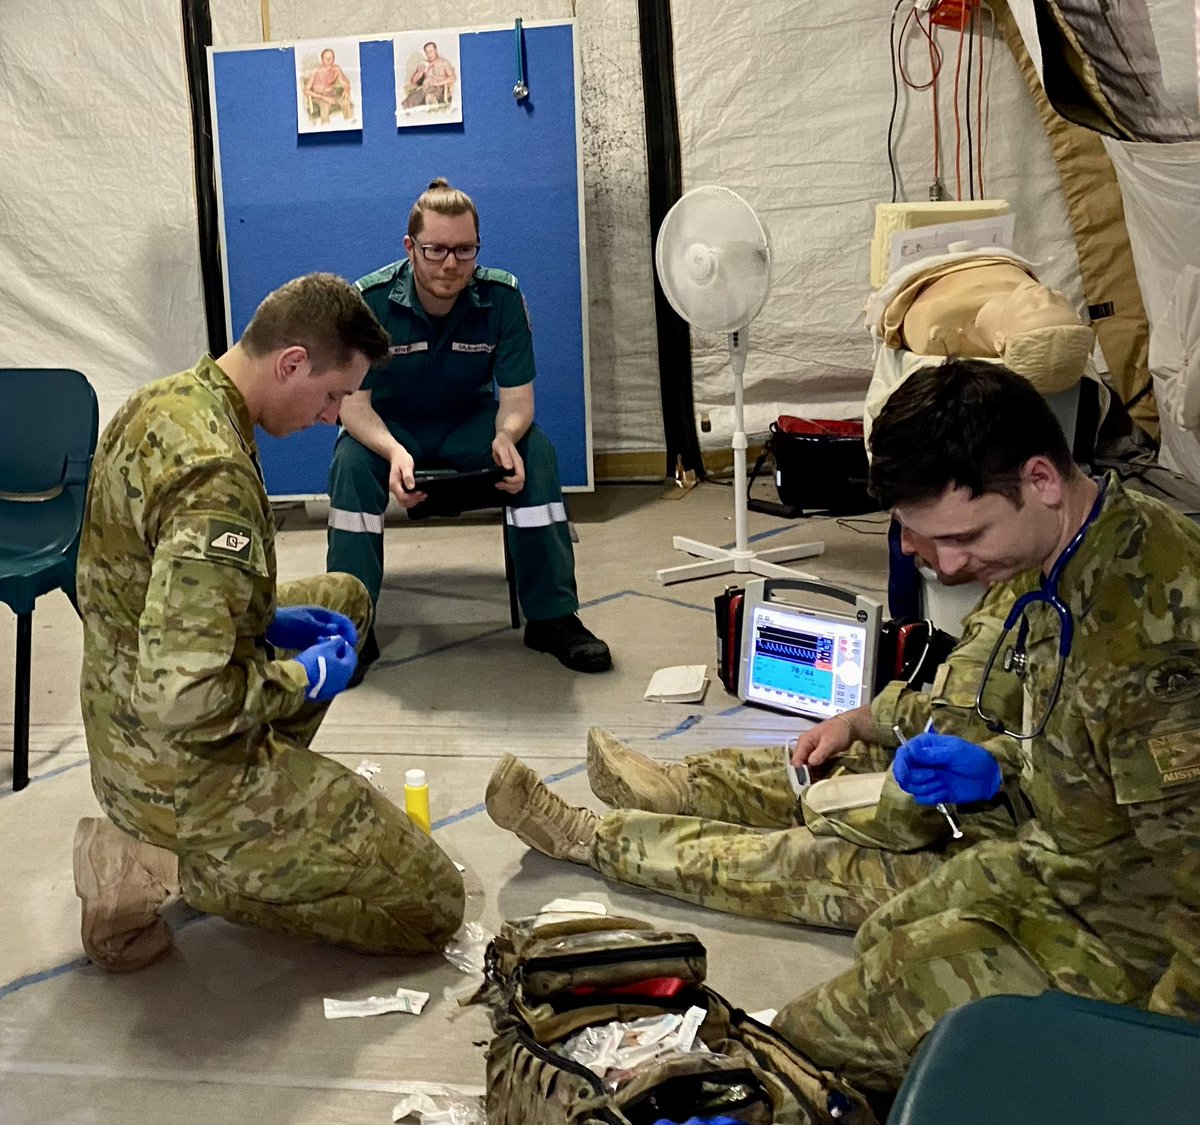 Always great to see our @AustralianArmy medics and combat first aiders developing their clinical skills with support from the team at SAAS. Building relationships in the community we serve. @COMD2Bde Huge thanks to the leadership of 3HB. @AustralianArmy